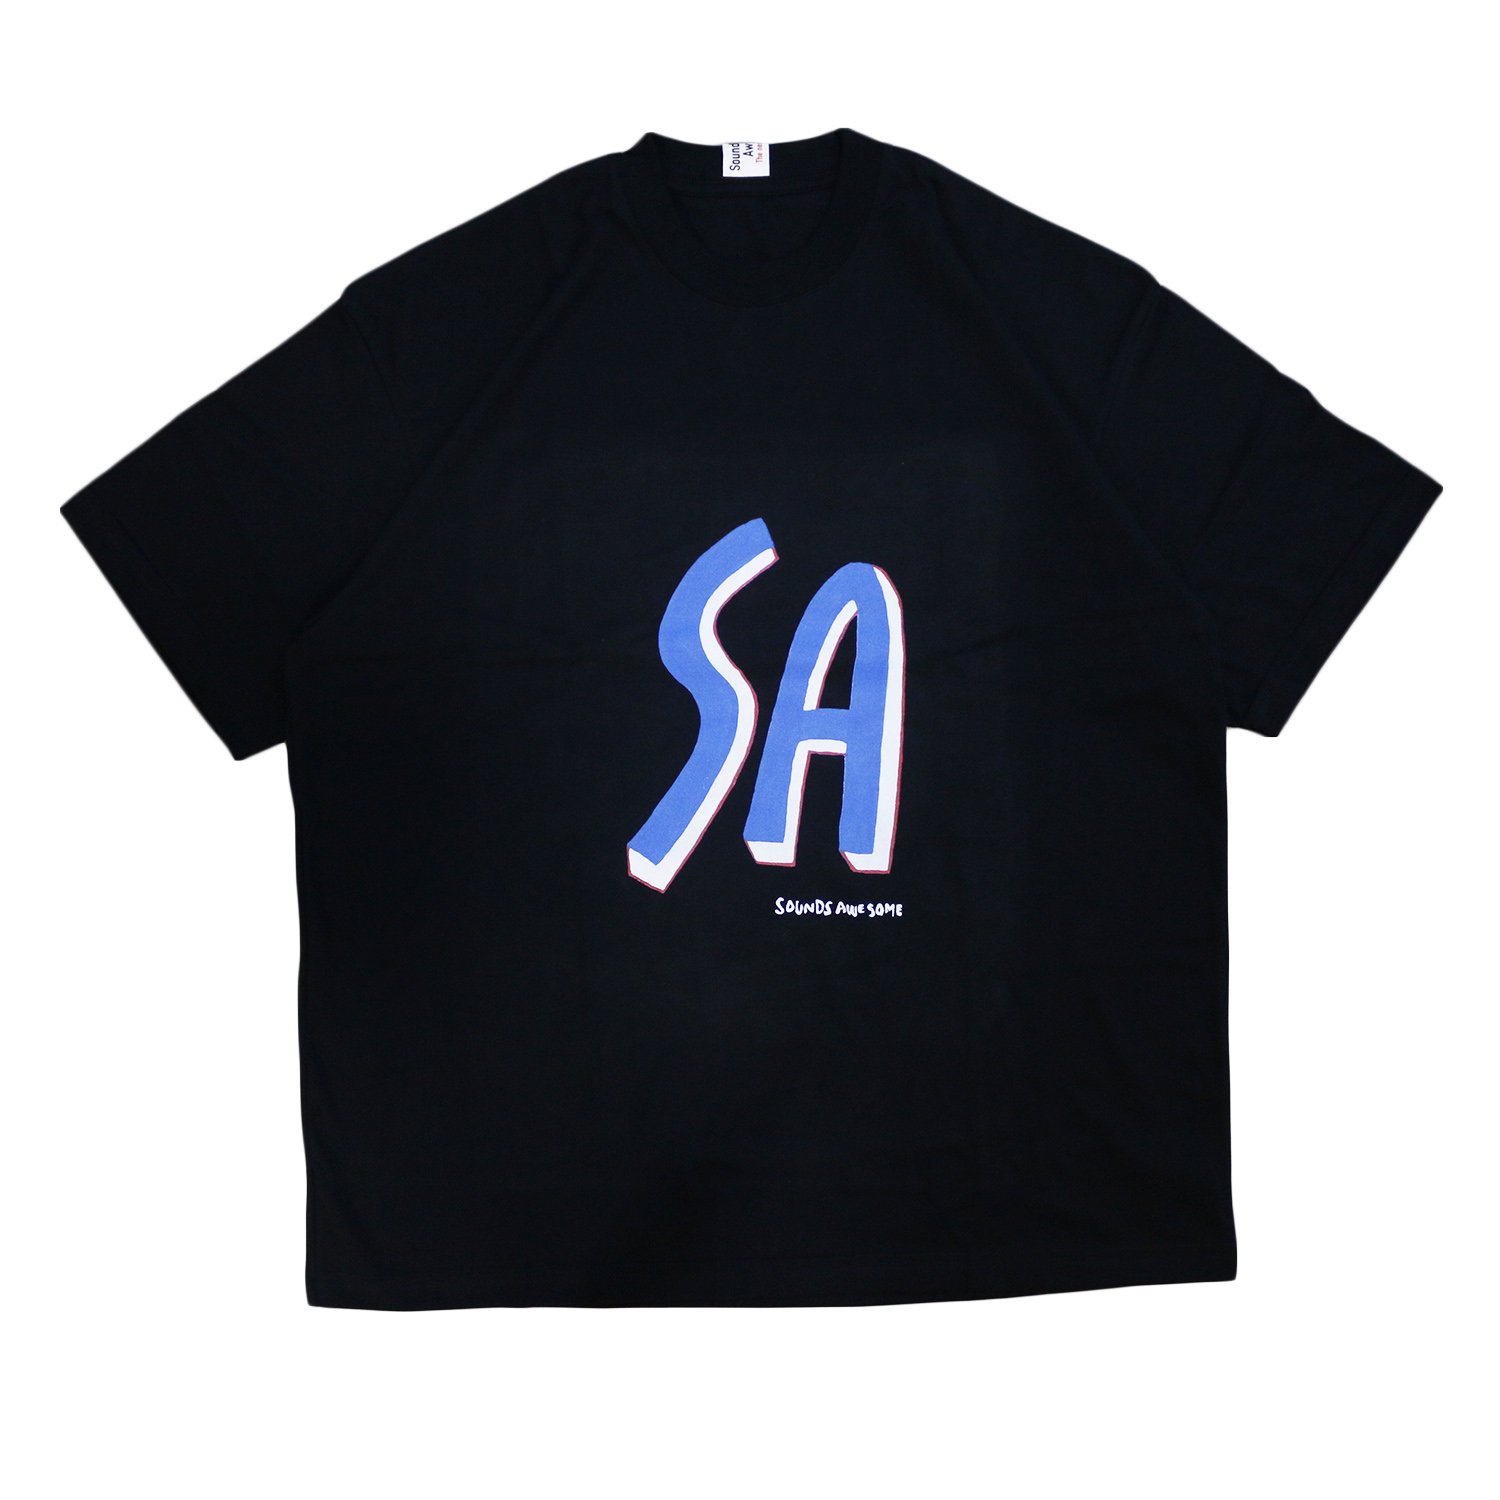 <img class='new_mark_img1' src='https://img.shop-pro.jp/img/new/icons8.gif' style='border:none;display:inline;margin:0px;padding:0px;width:auto;' />SOUNDS AWESOME / SA Logo printed  T-shirt